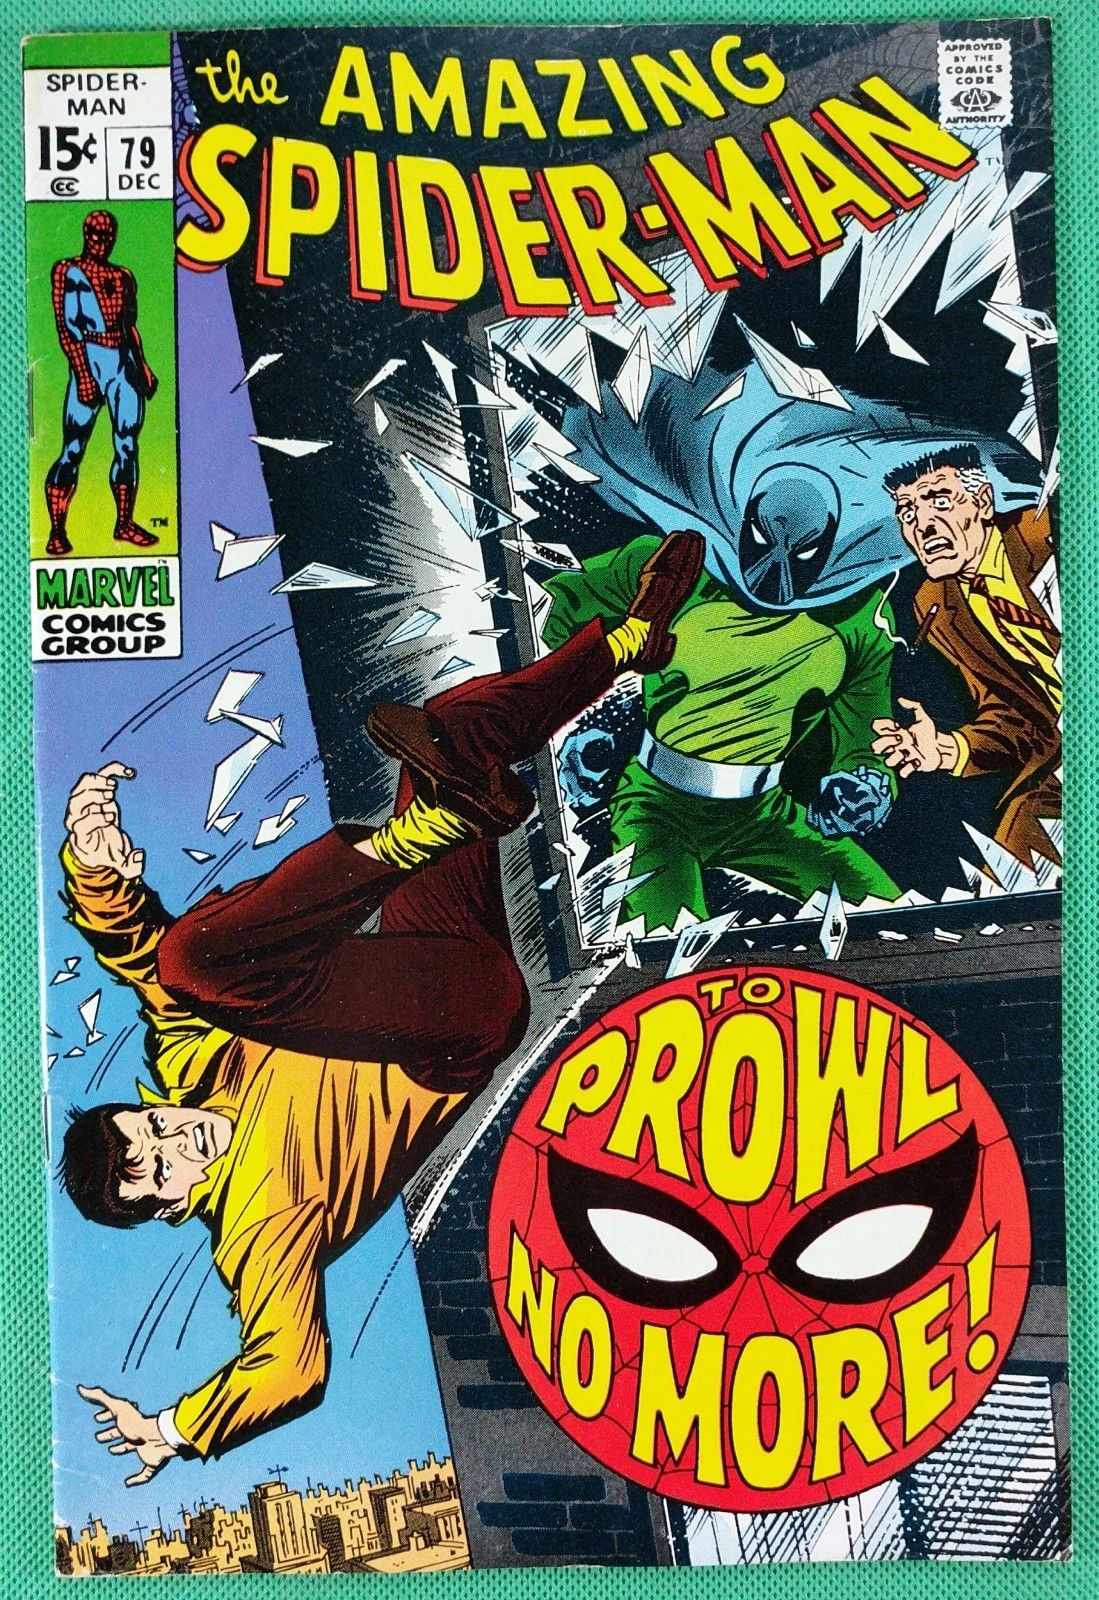 THE AMAZING SPIDER-MAN #79 ==> FN/VF THE PROWLER MARVEL 